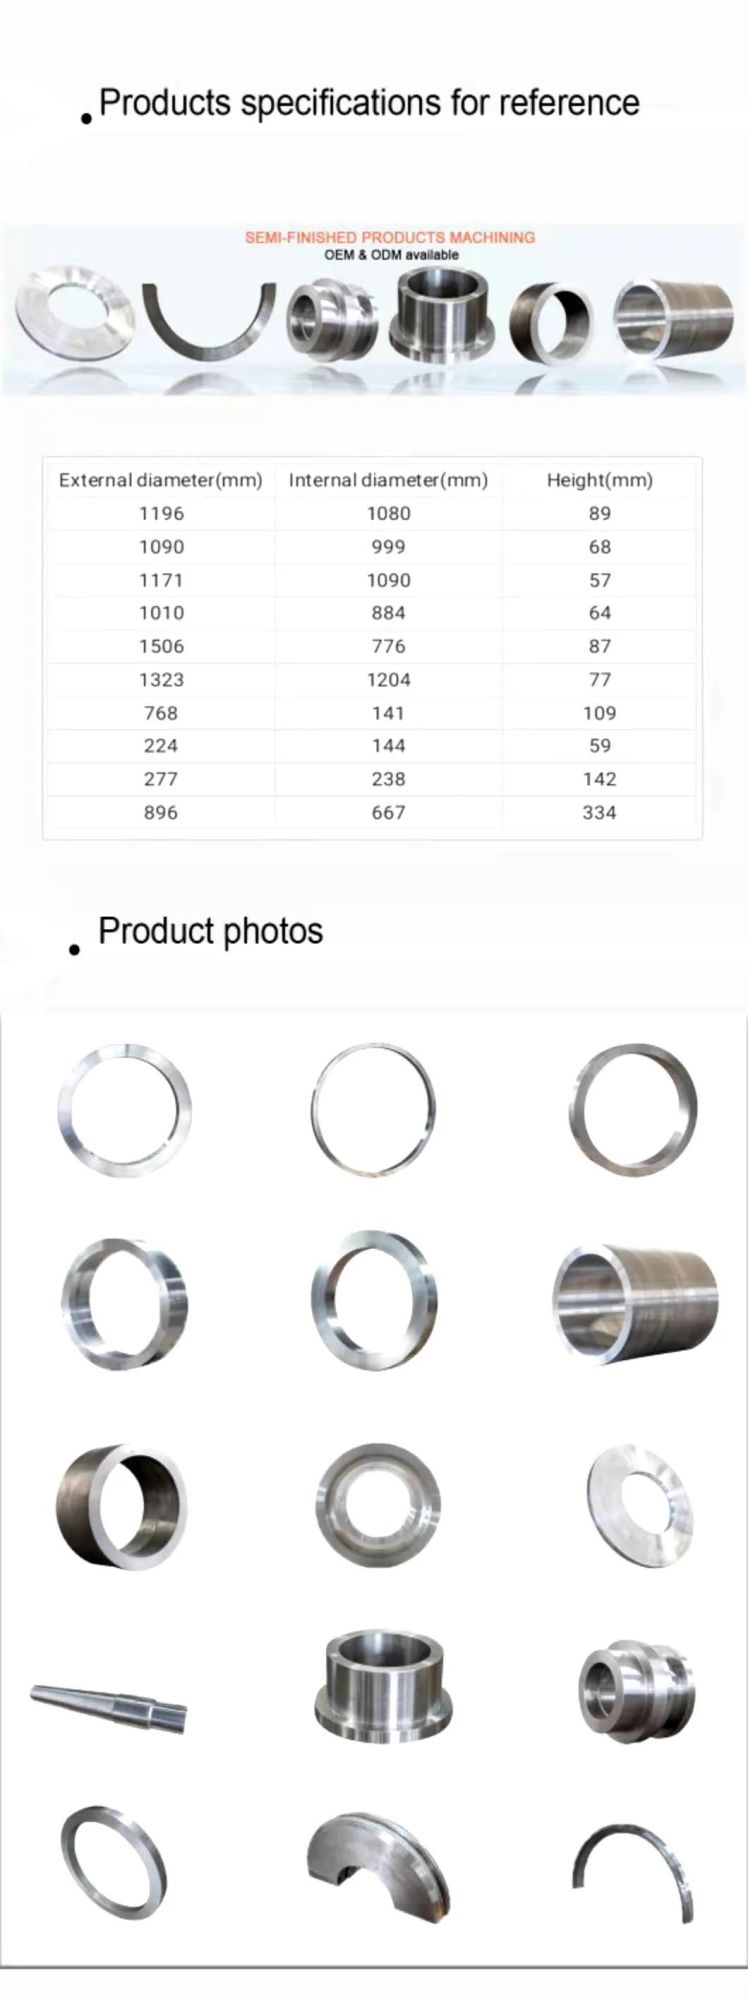 ODM Hot Forged Flange Alloy Steel China Made